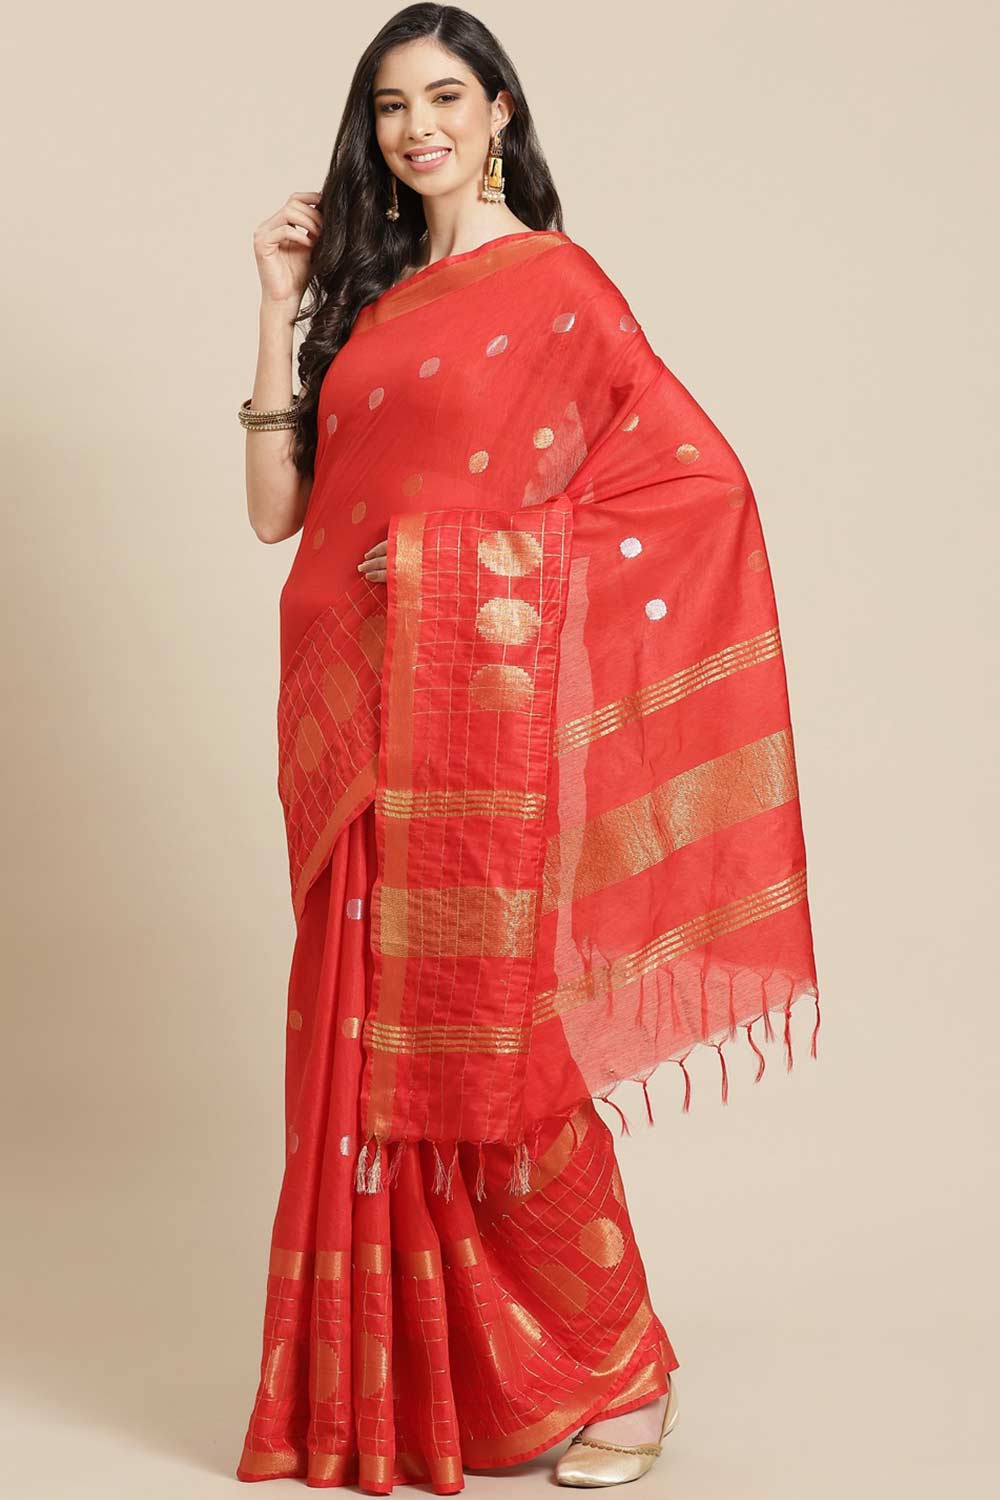 Buy Red Zari Woven Blended Silk One Minute Saree Online